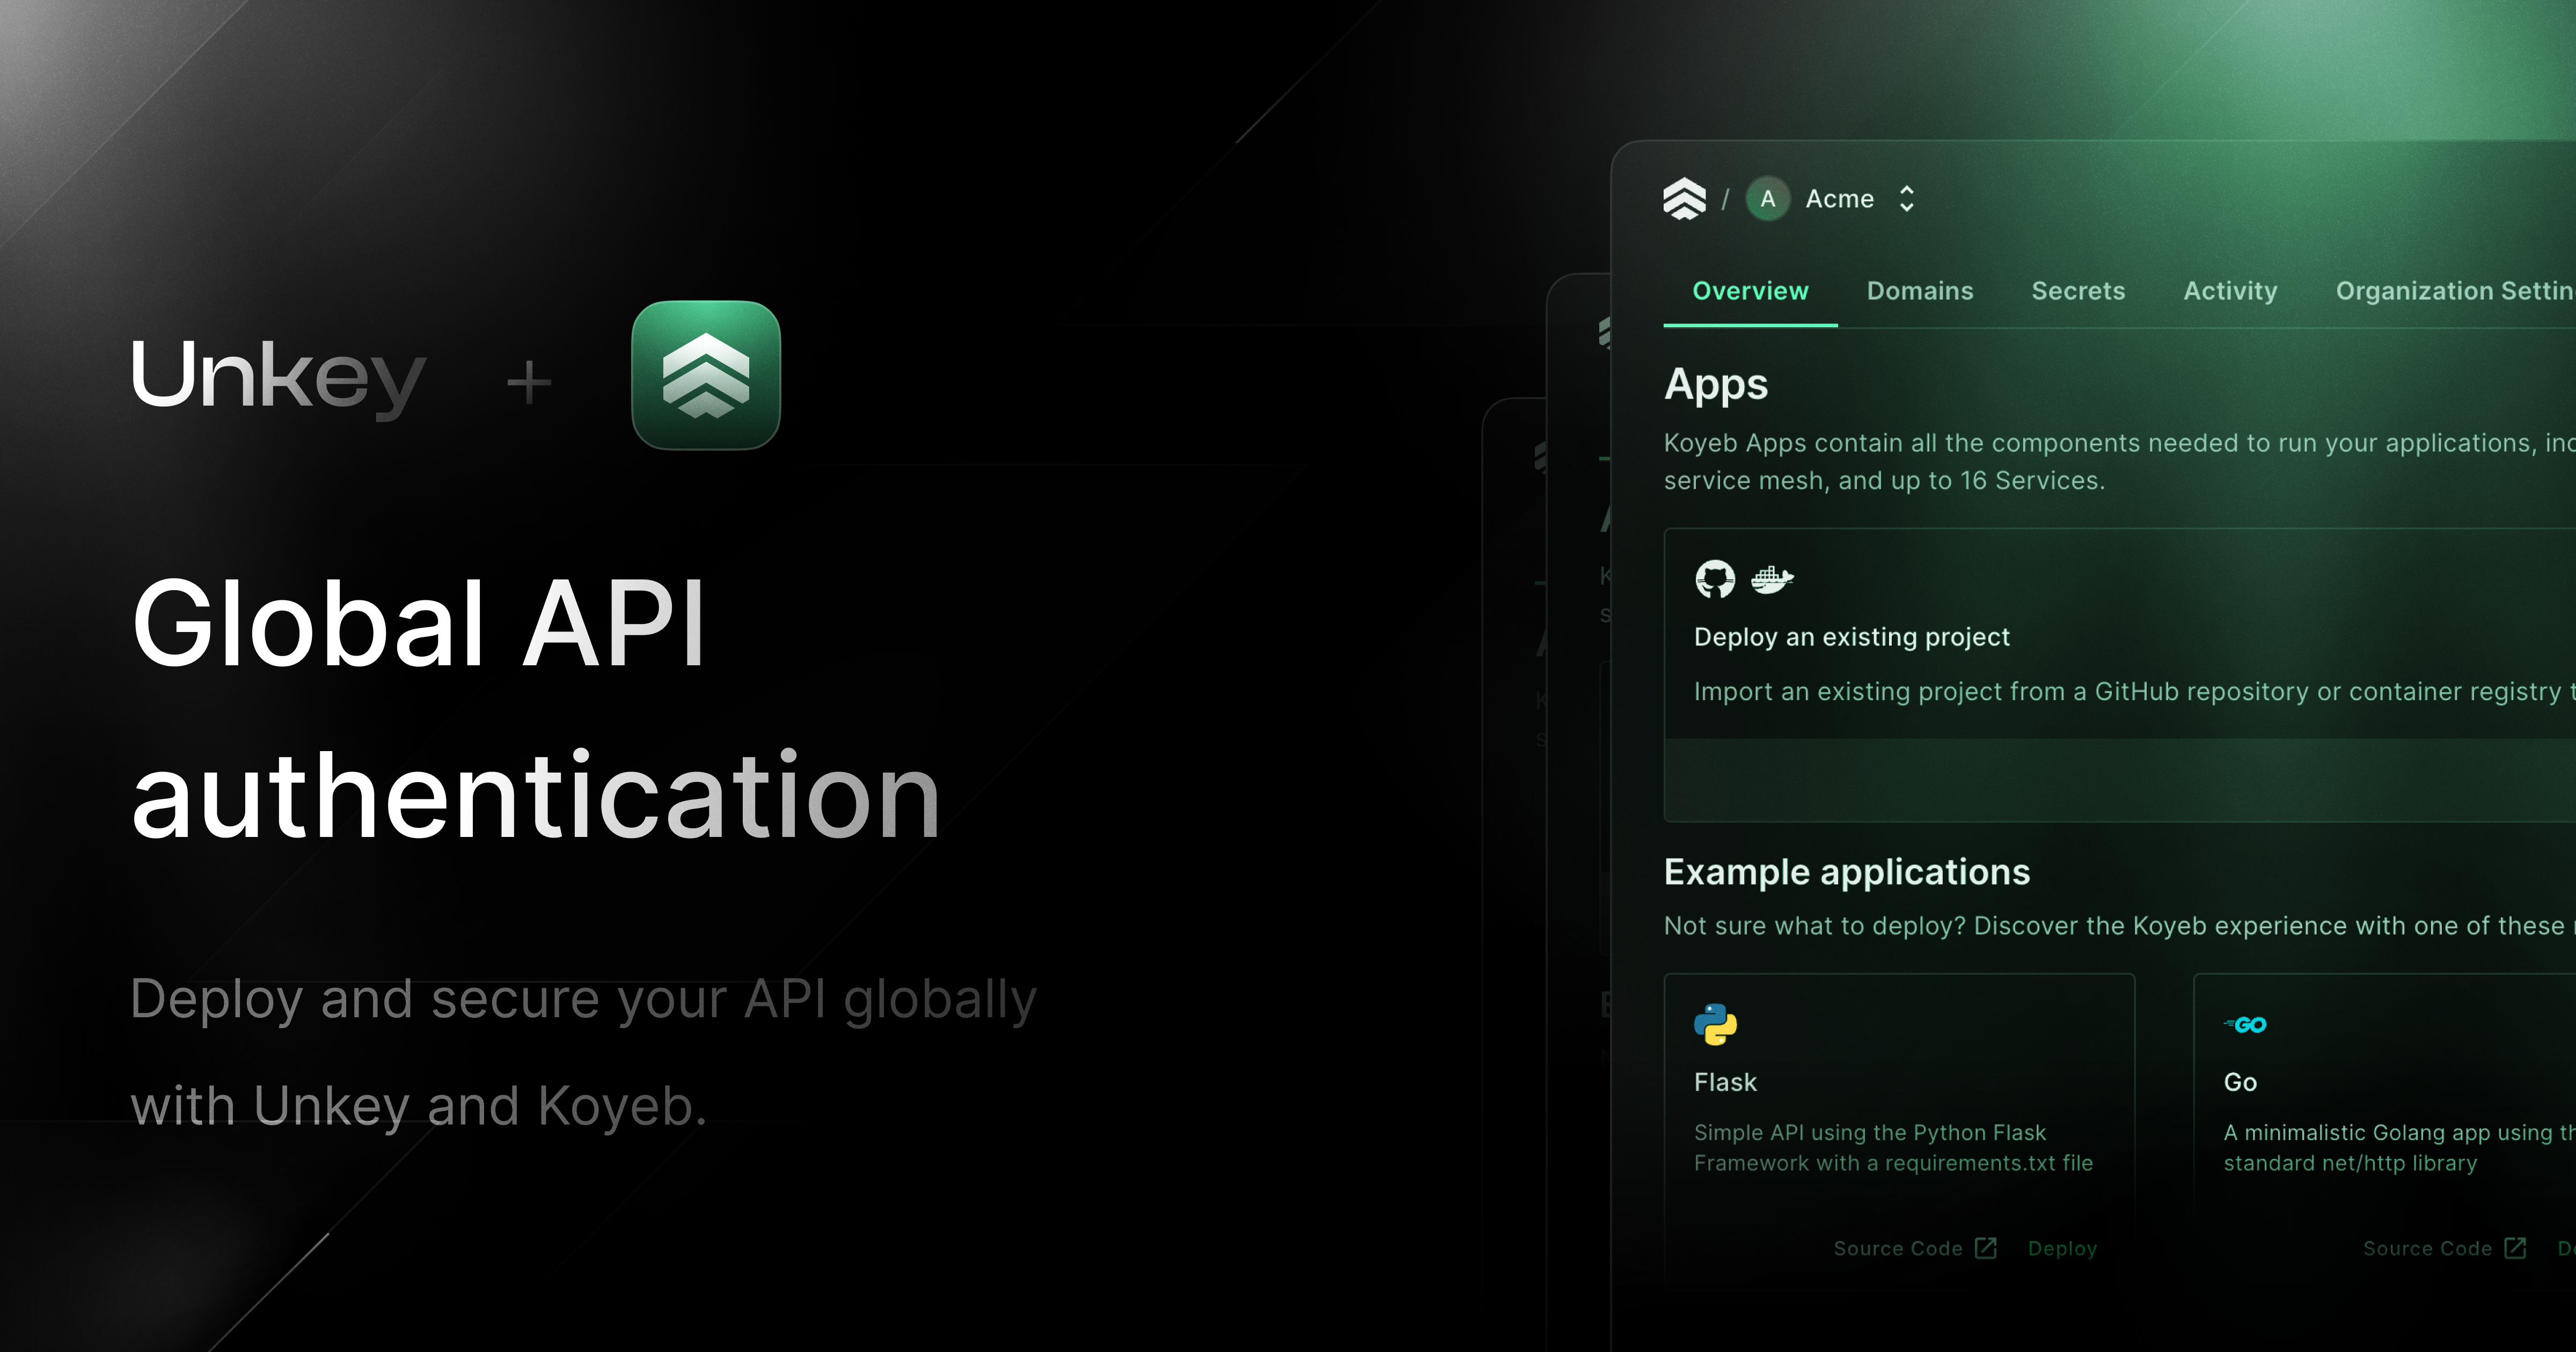 Deploy and secure your API globally with Unkey and Koyeb.